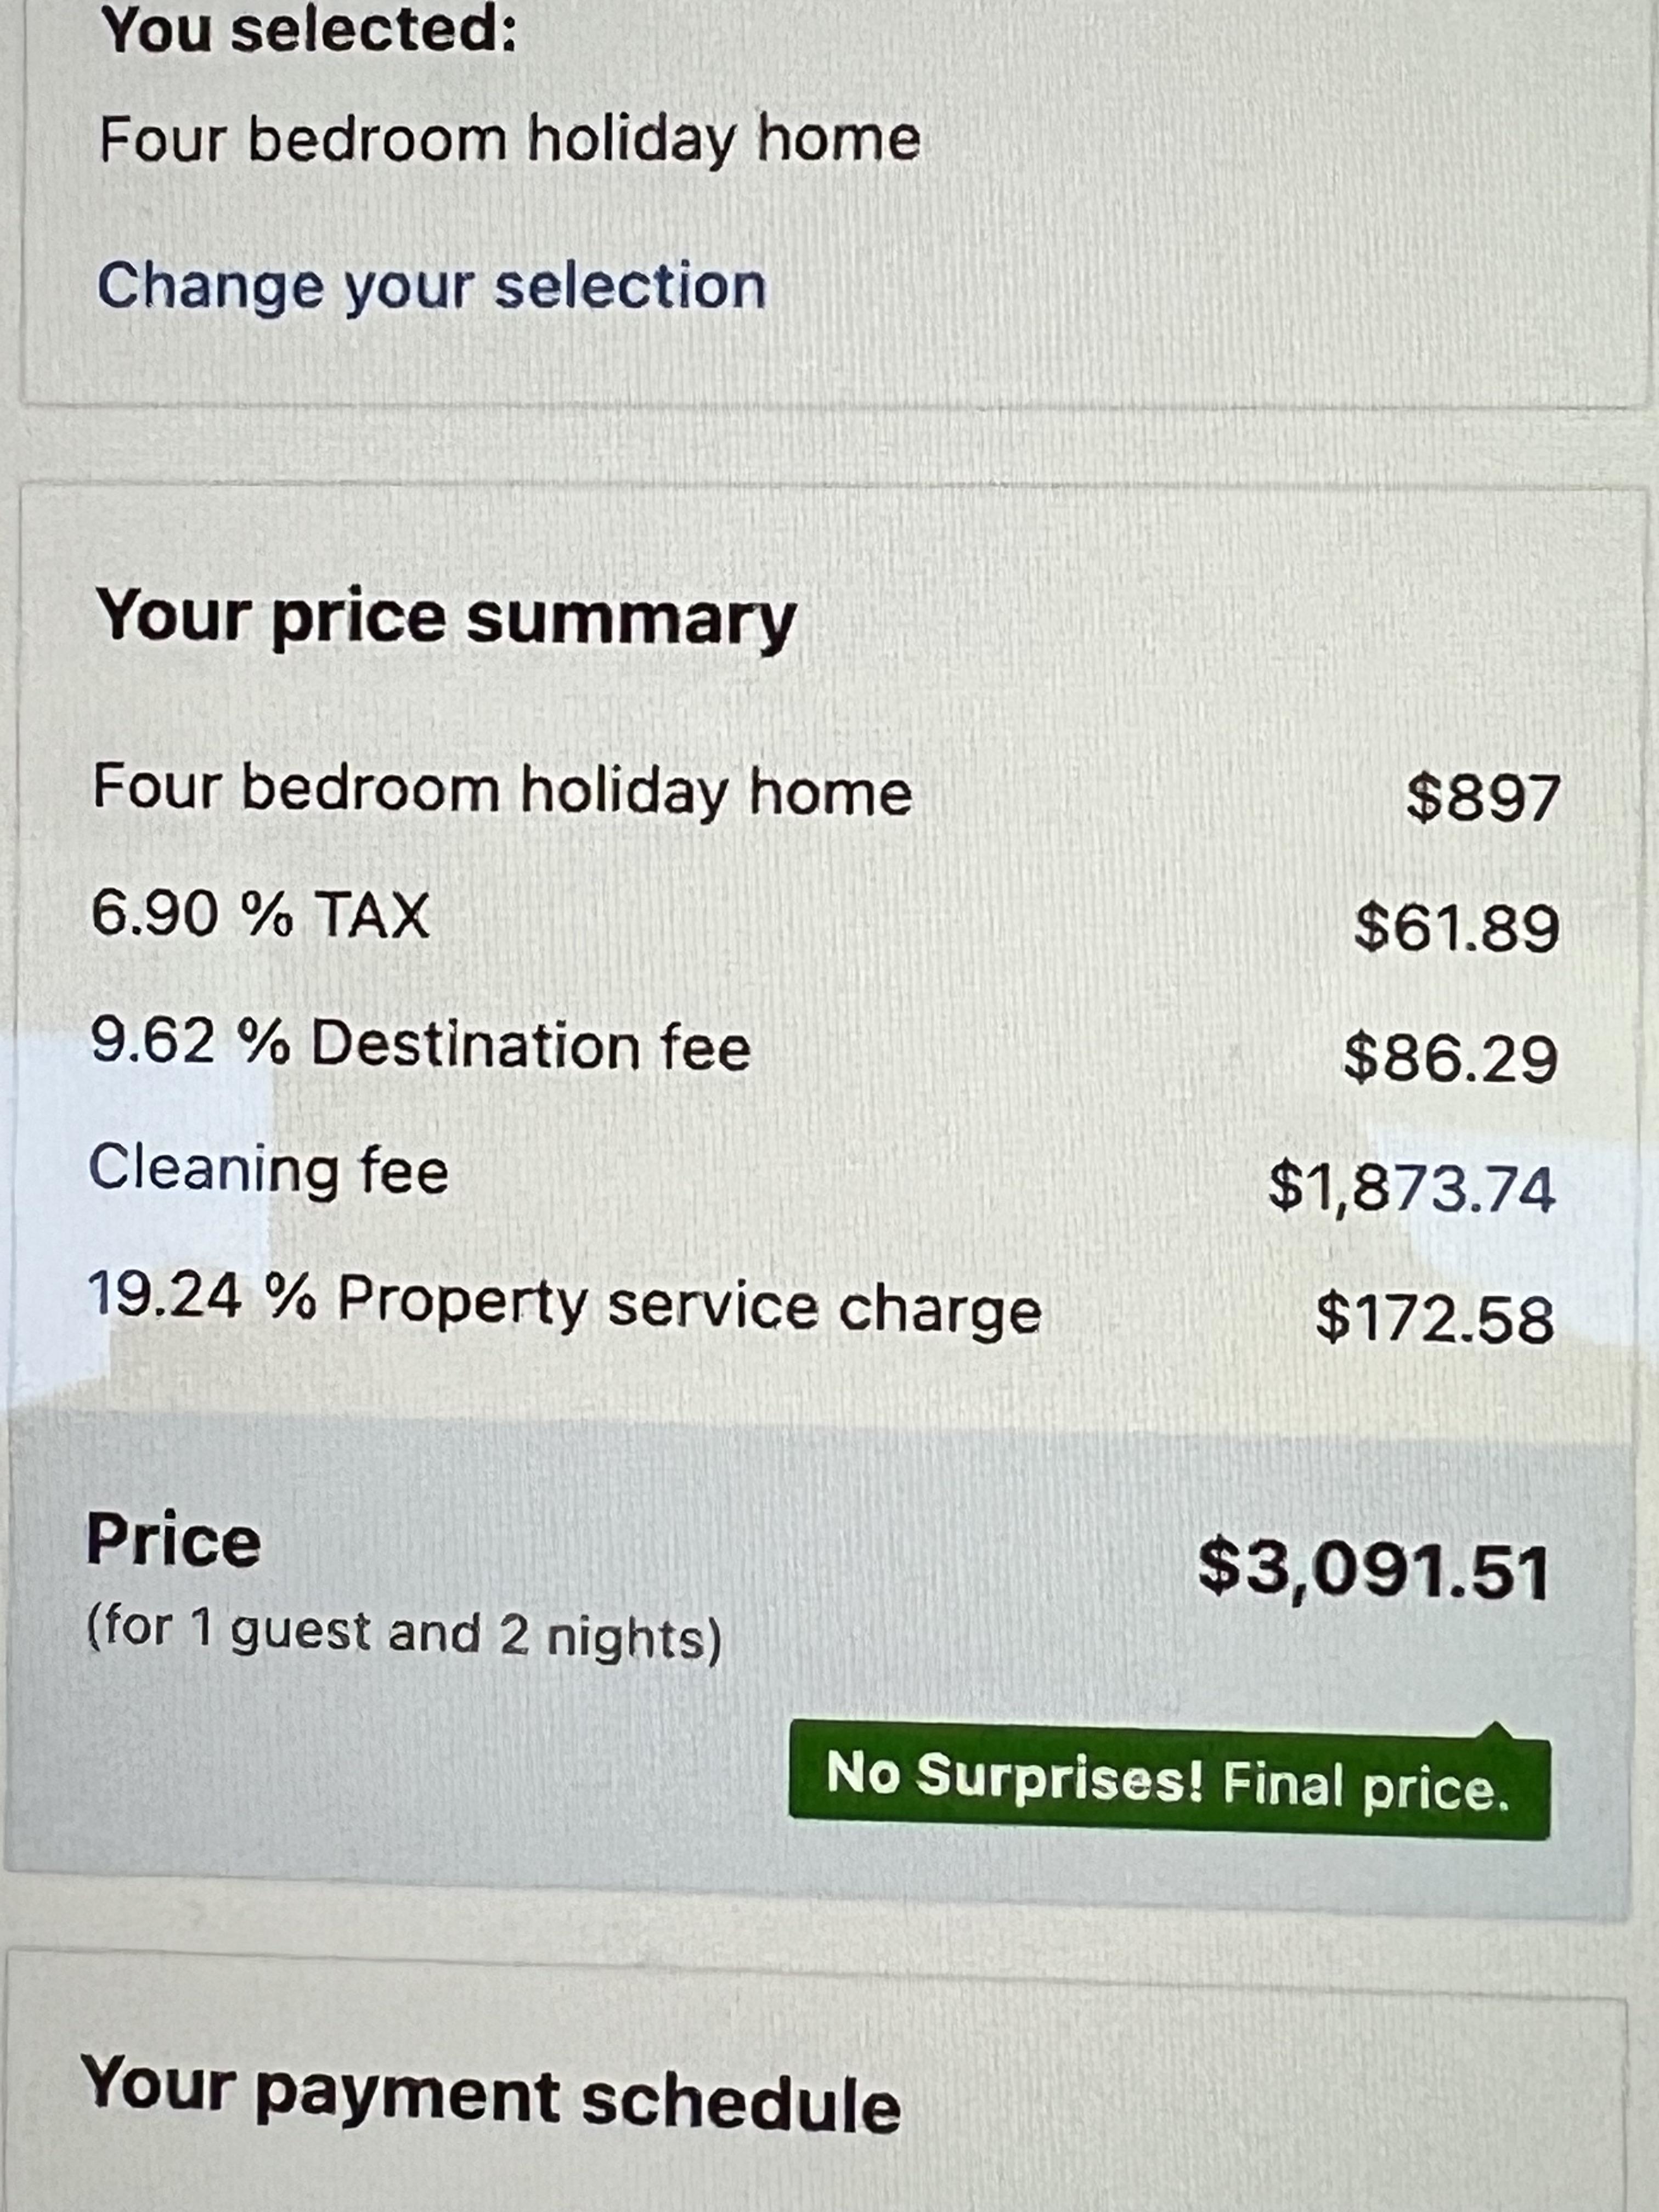 The receipt says a rental home costs $897, then adds $61 in tax, $86 for a destination fee, $172 for property service charge, and $1,873 for a cleaning fee, for a &quot;no surprises&quot; total of $3,000